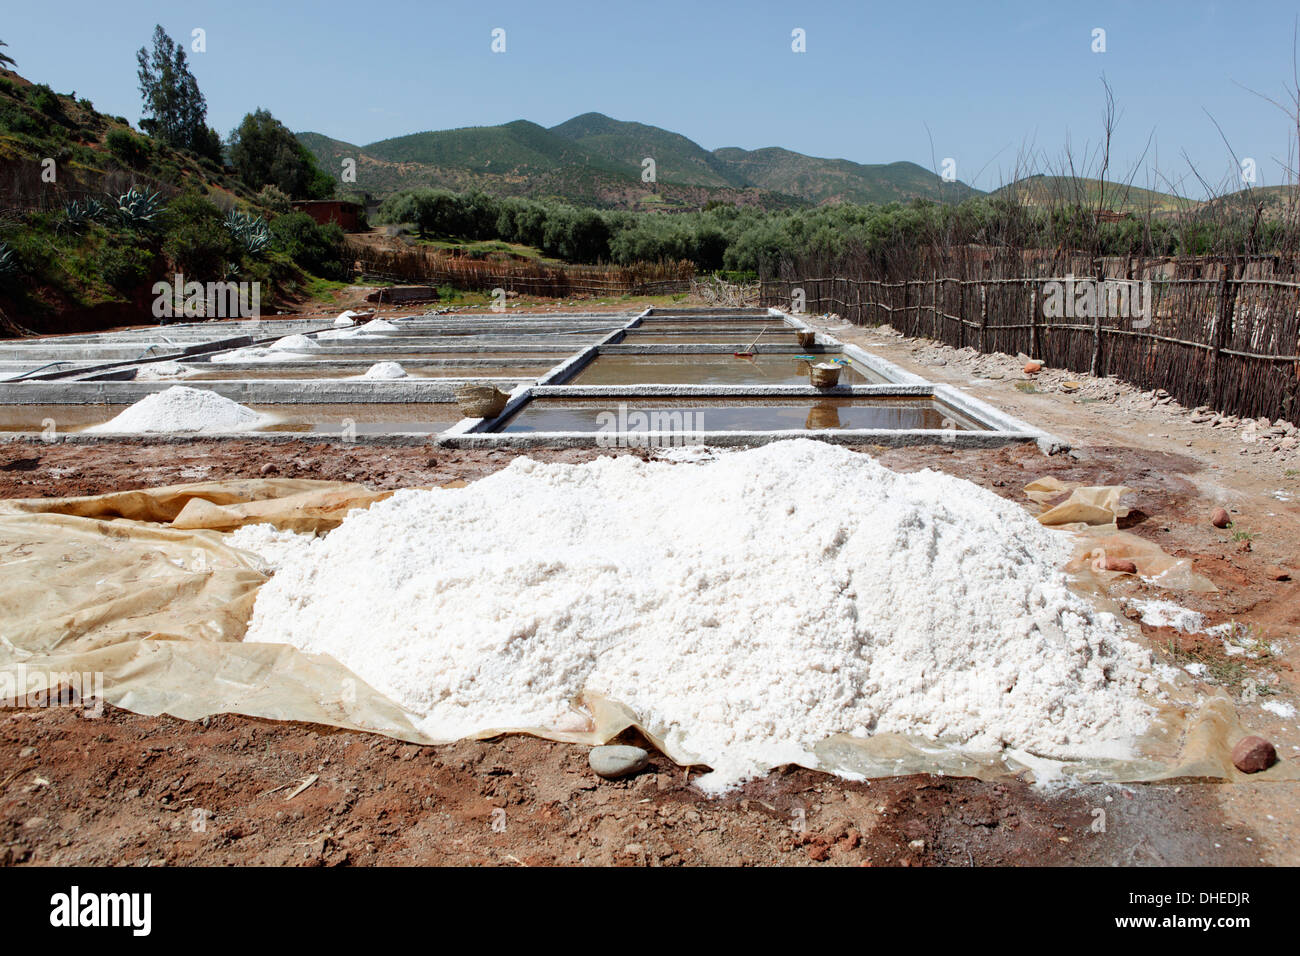 Salt evaporation ponds, Ourika Valley, Atlas Mountains, Morocco, North Africa, Africa Stock Photo